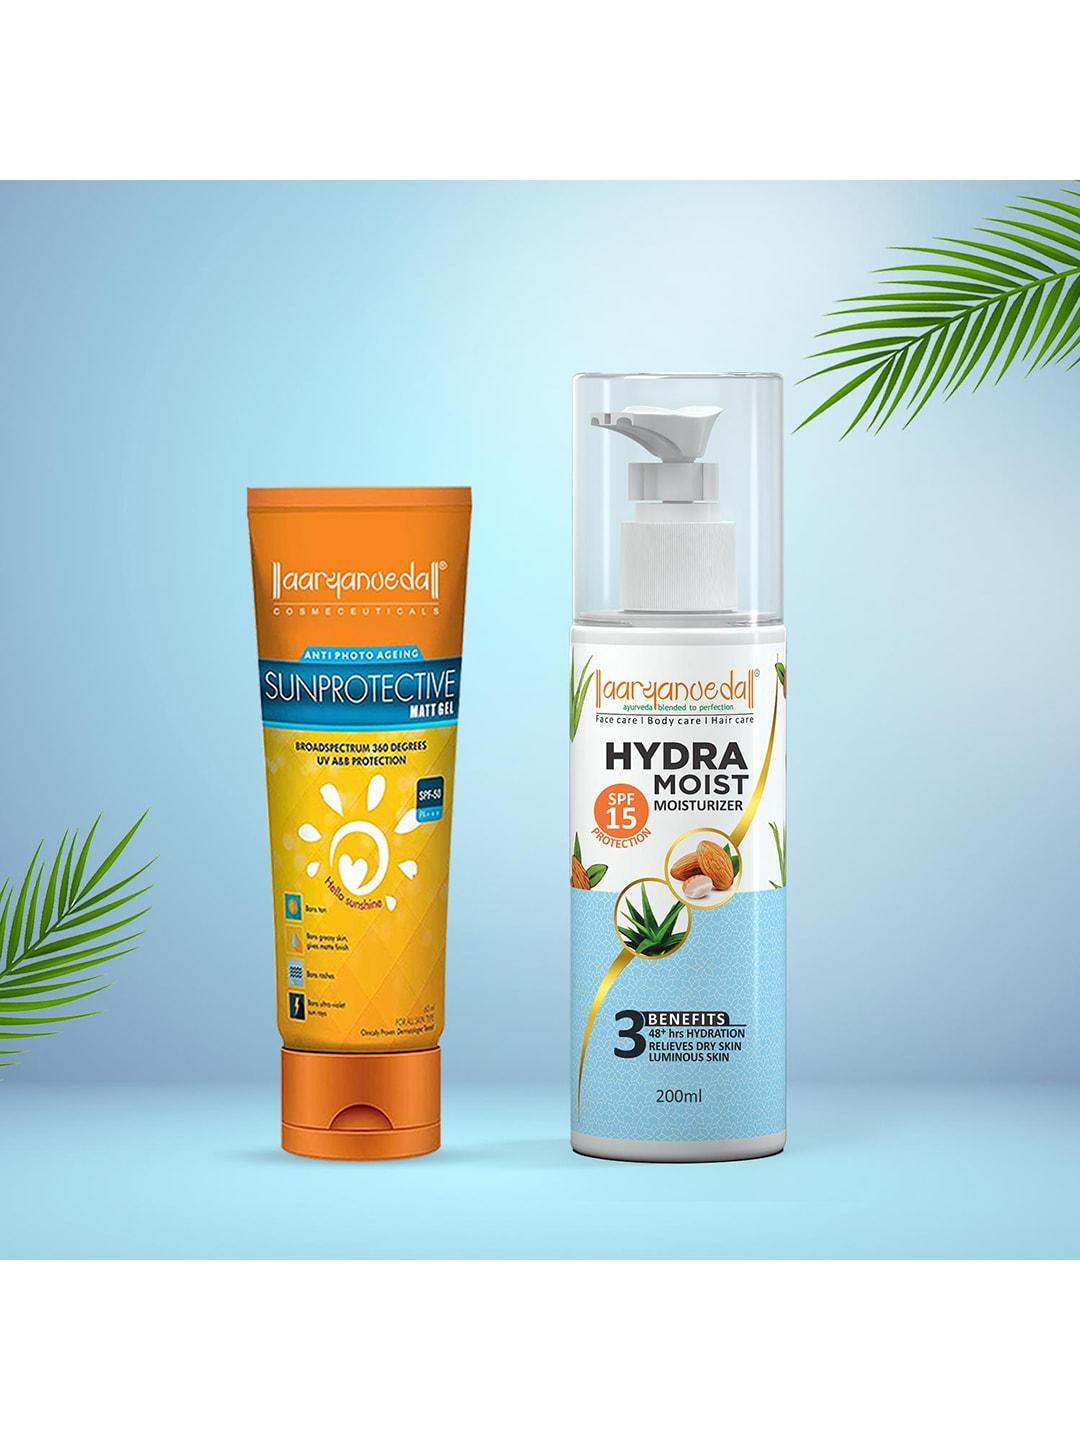 Aryanveda Sunscreen Spf 50 PA+++ With Hydra Moisturizer Spf 15 For Sunprotective 260G